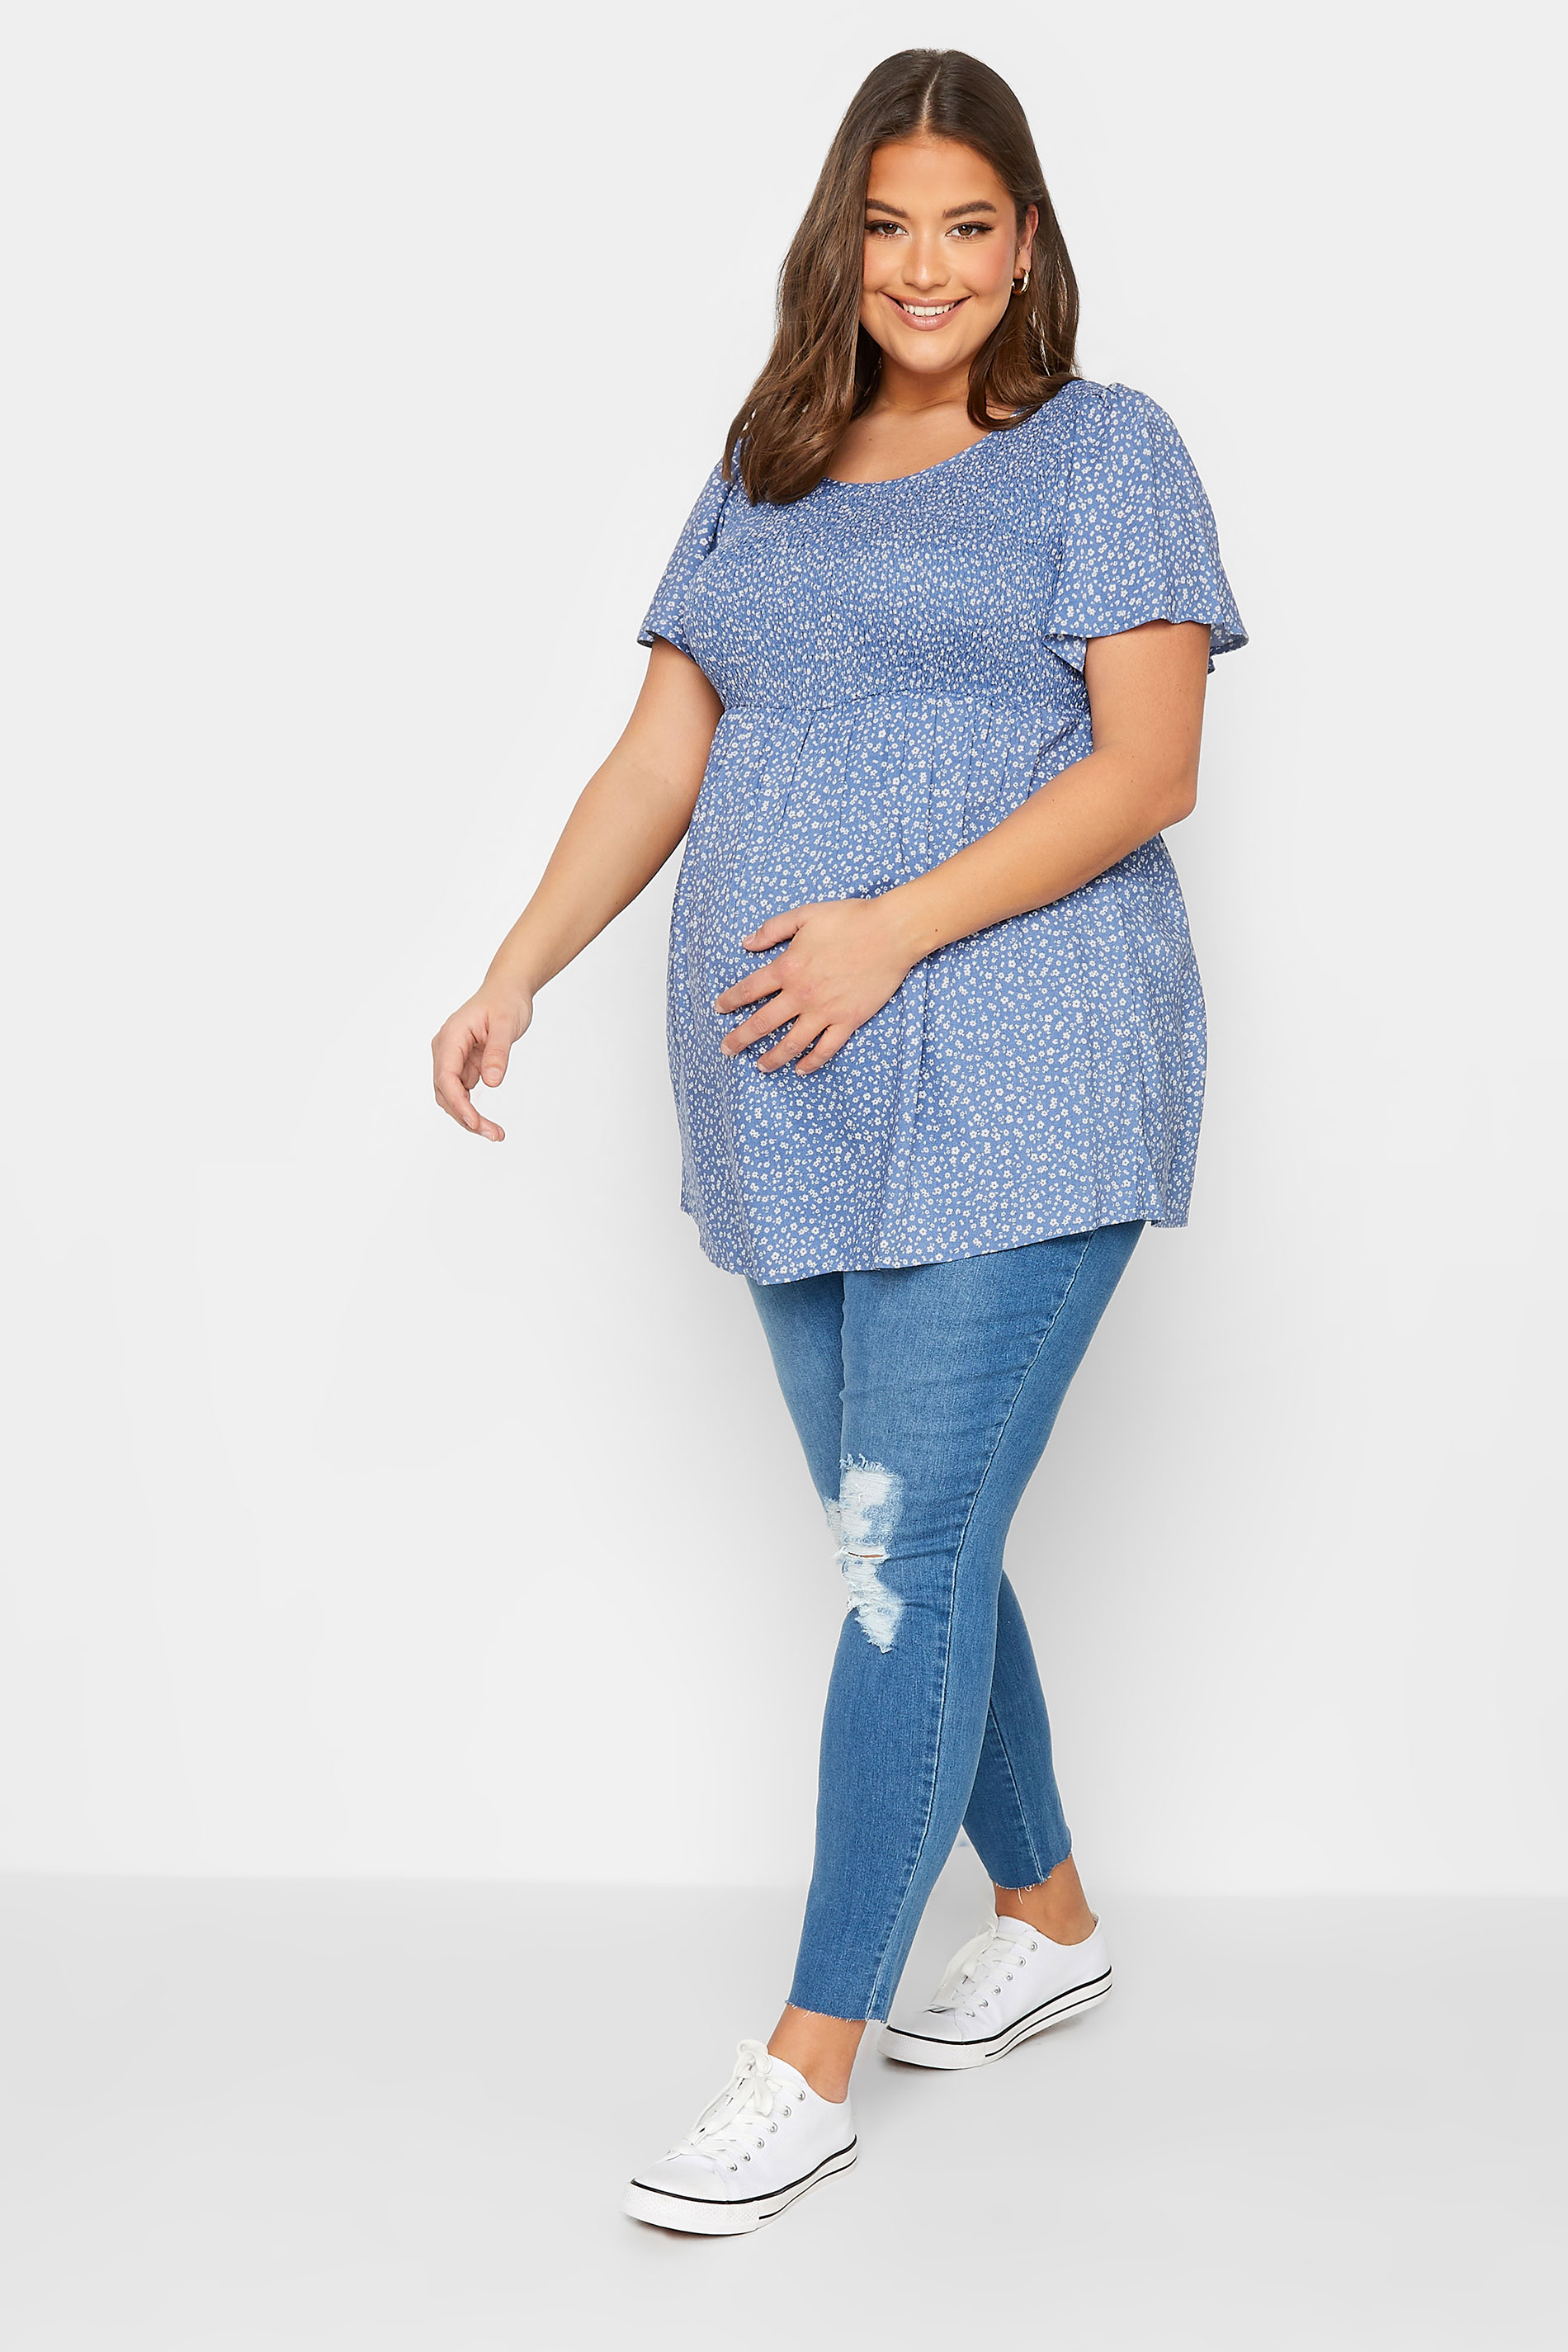 BUMP IT UP MATERNITY Plus Size Blue Spot Print Shirred Top | Yours Clothing 2